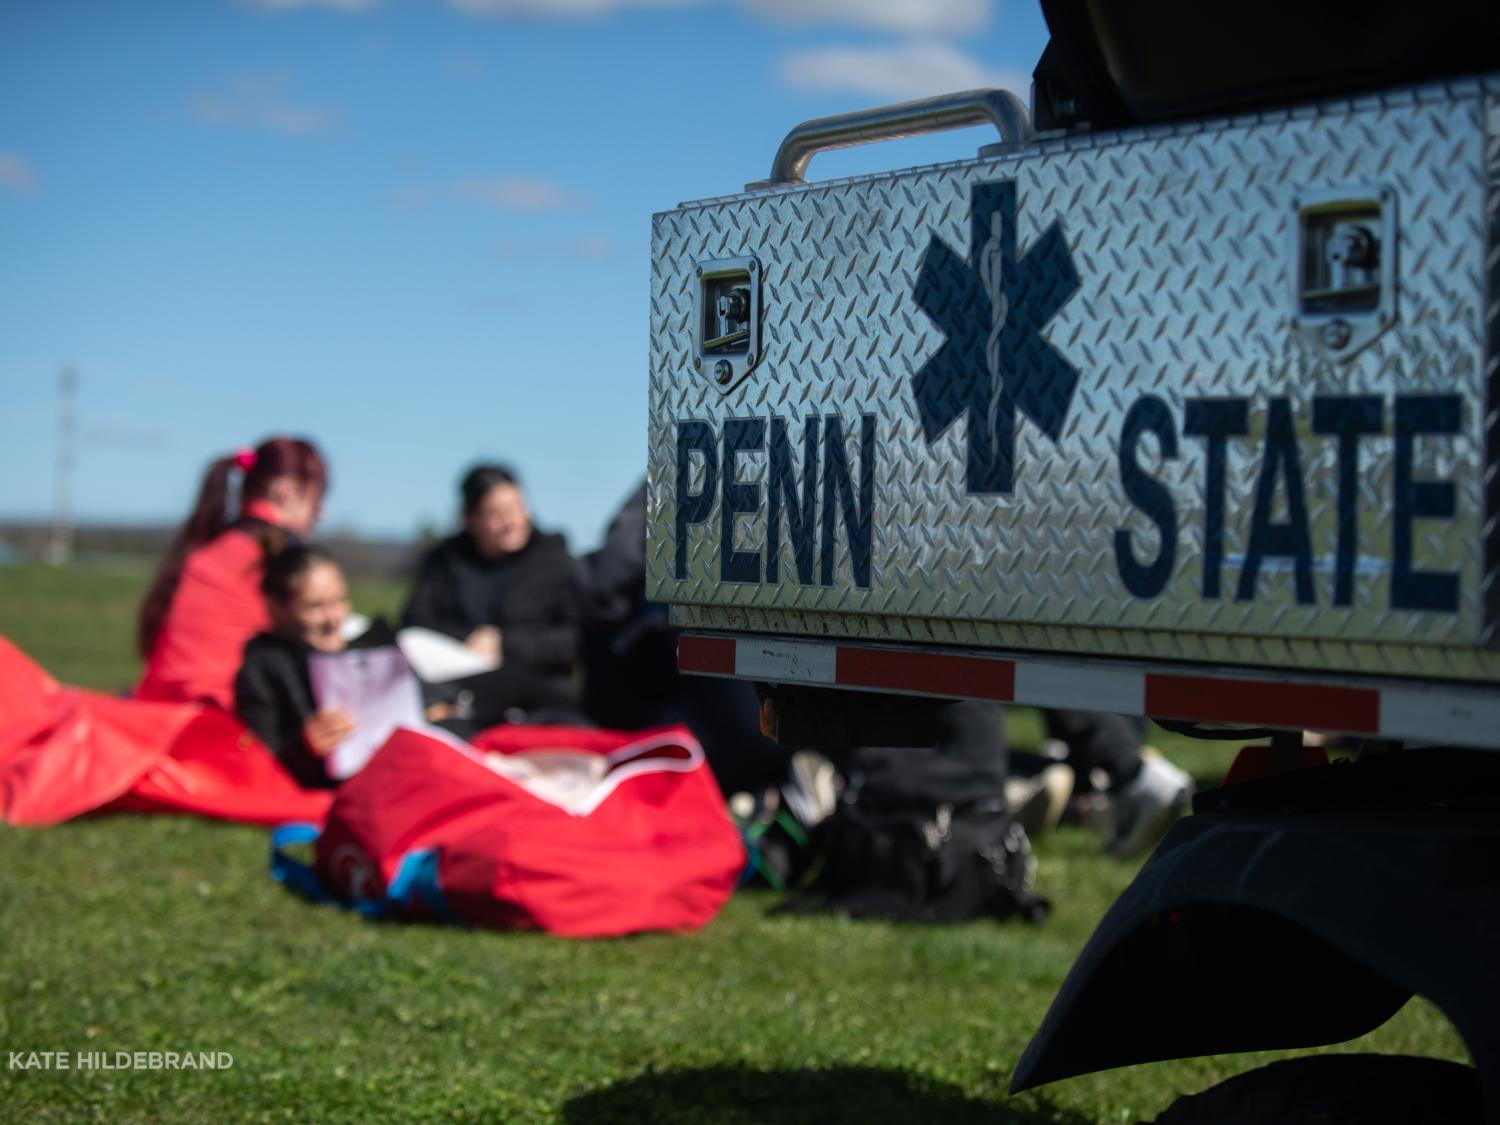 A Penn State emergency vehicle is parked on a grassy field with students sitting on the ground in the background.